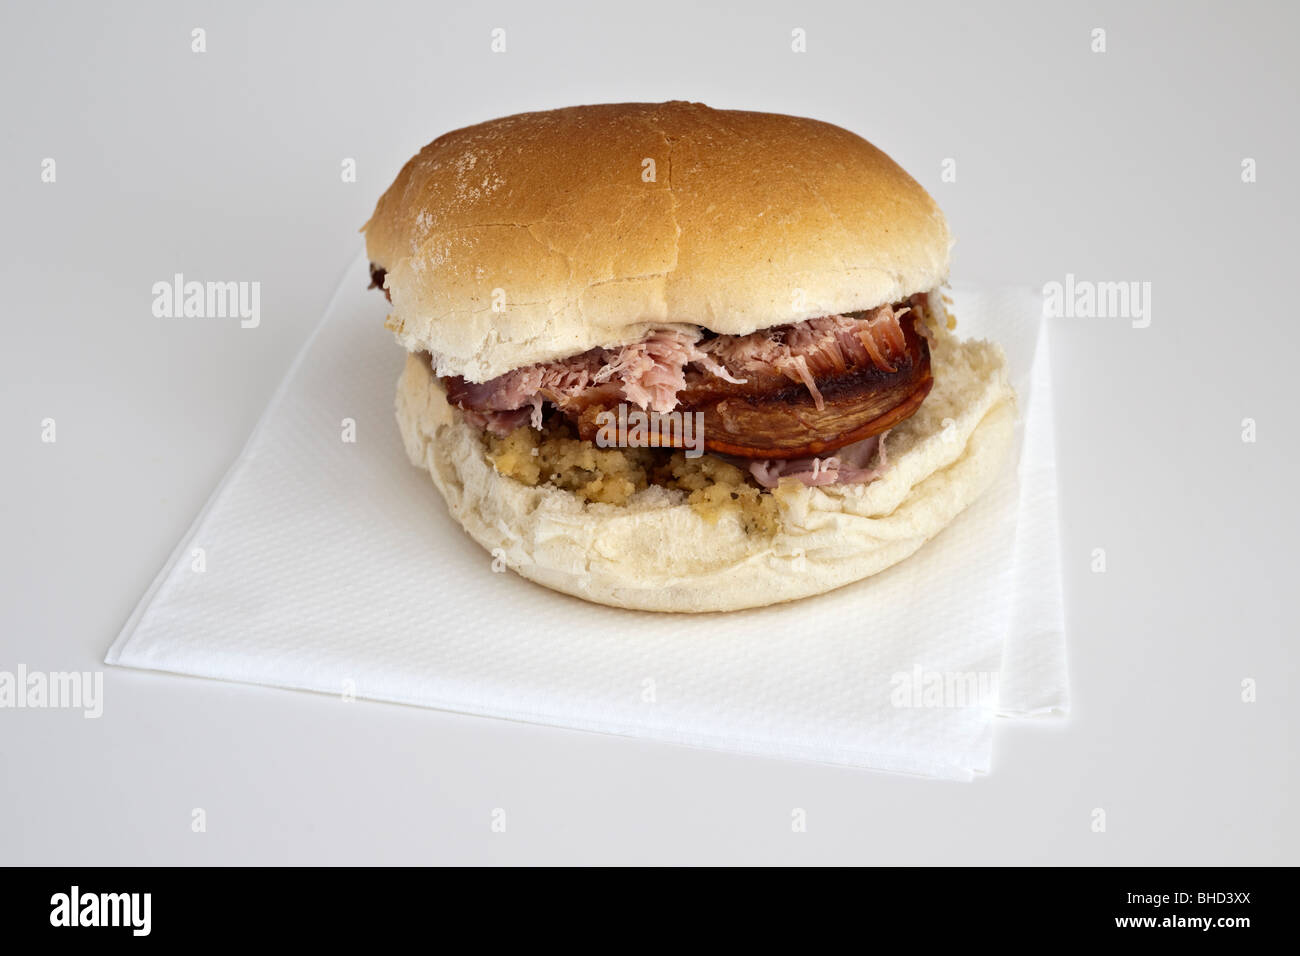 Roast pork sandwich on a white bread cake with apple sauce and crackling Stock Photo